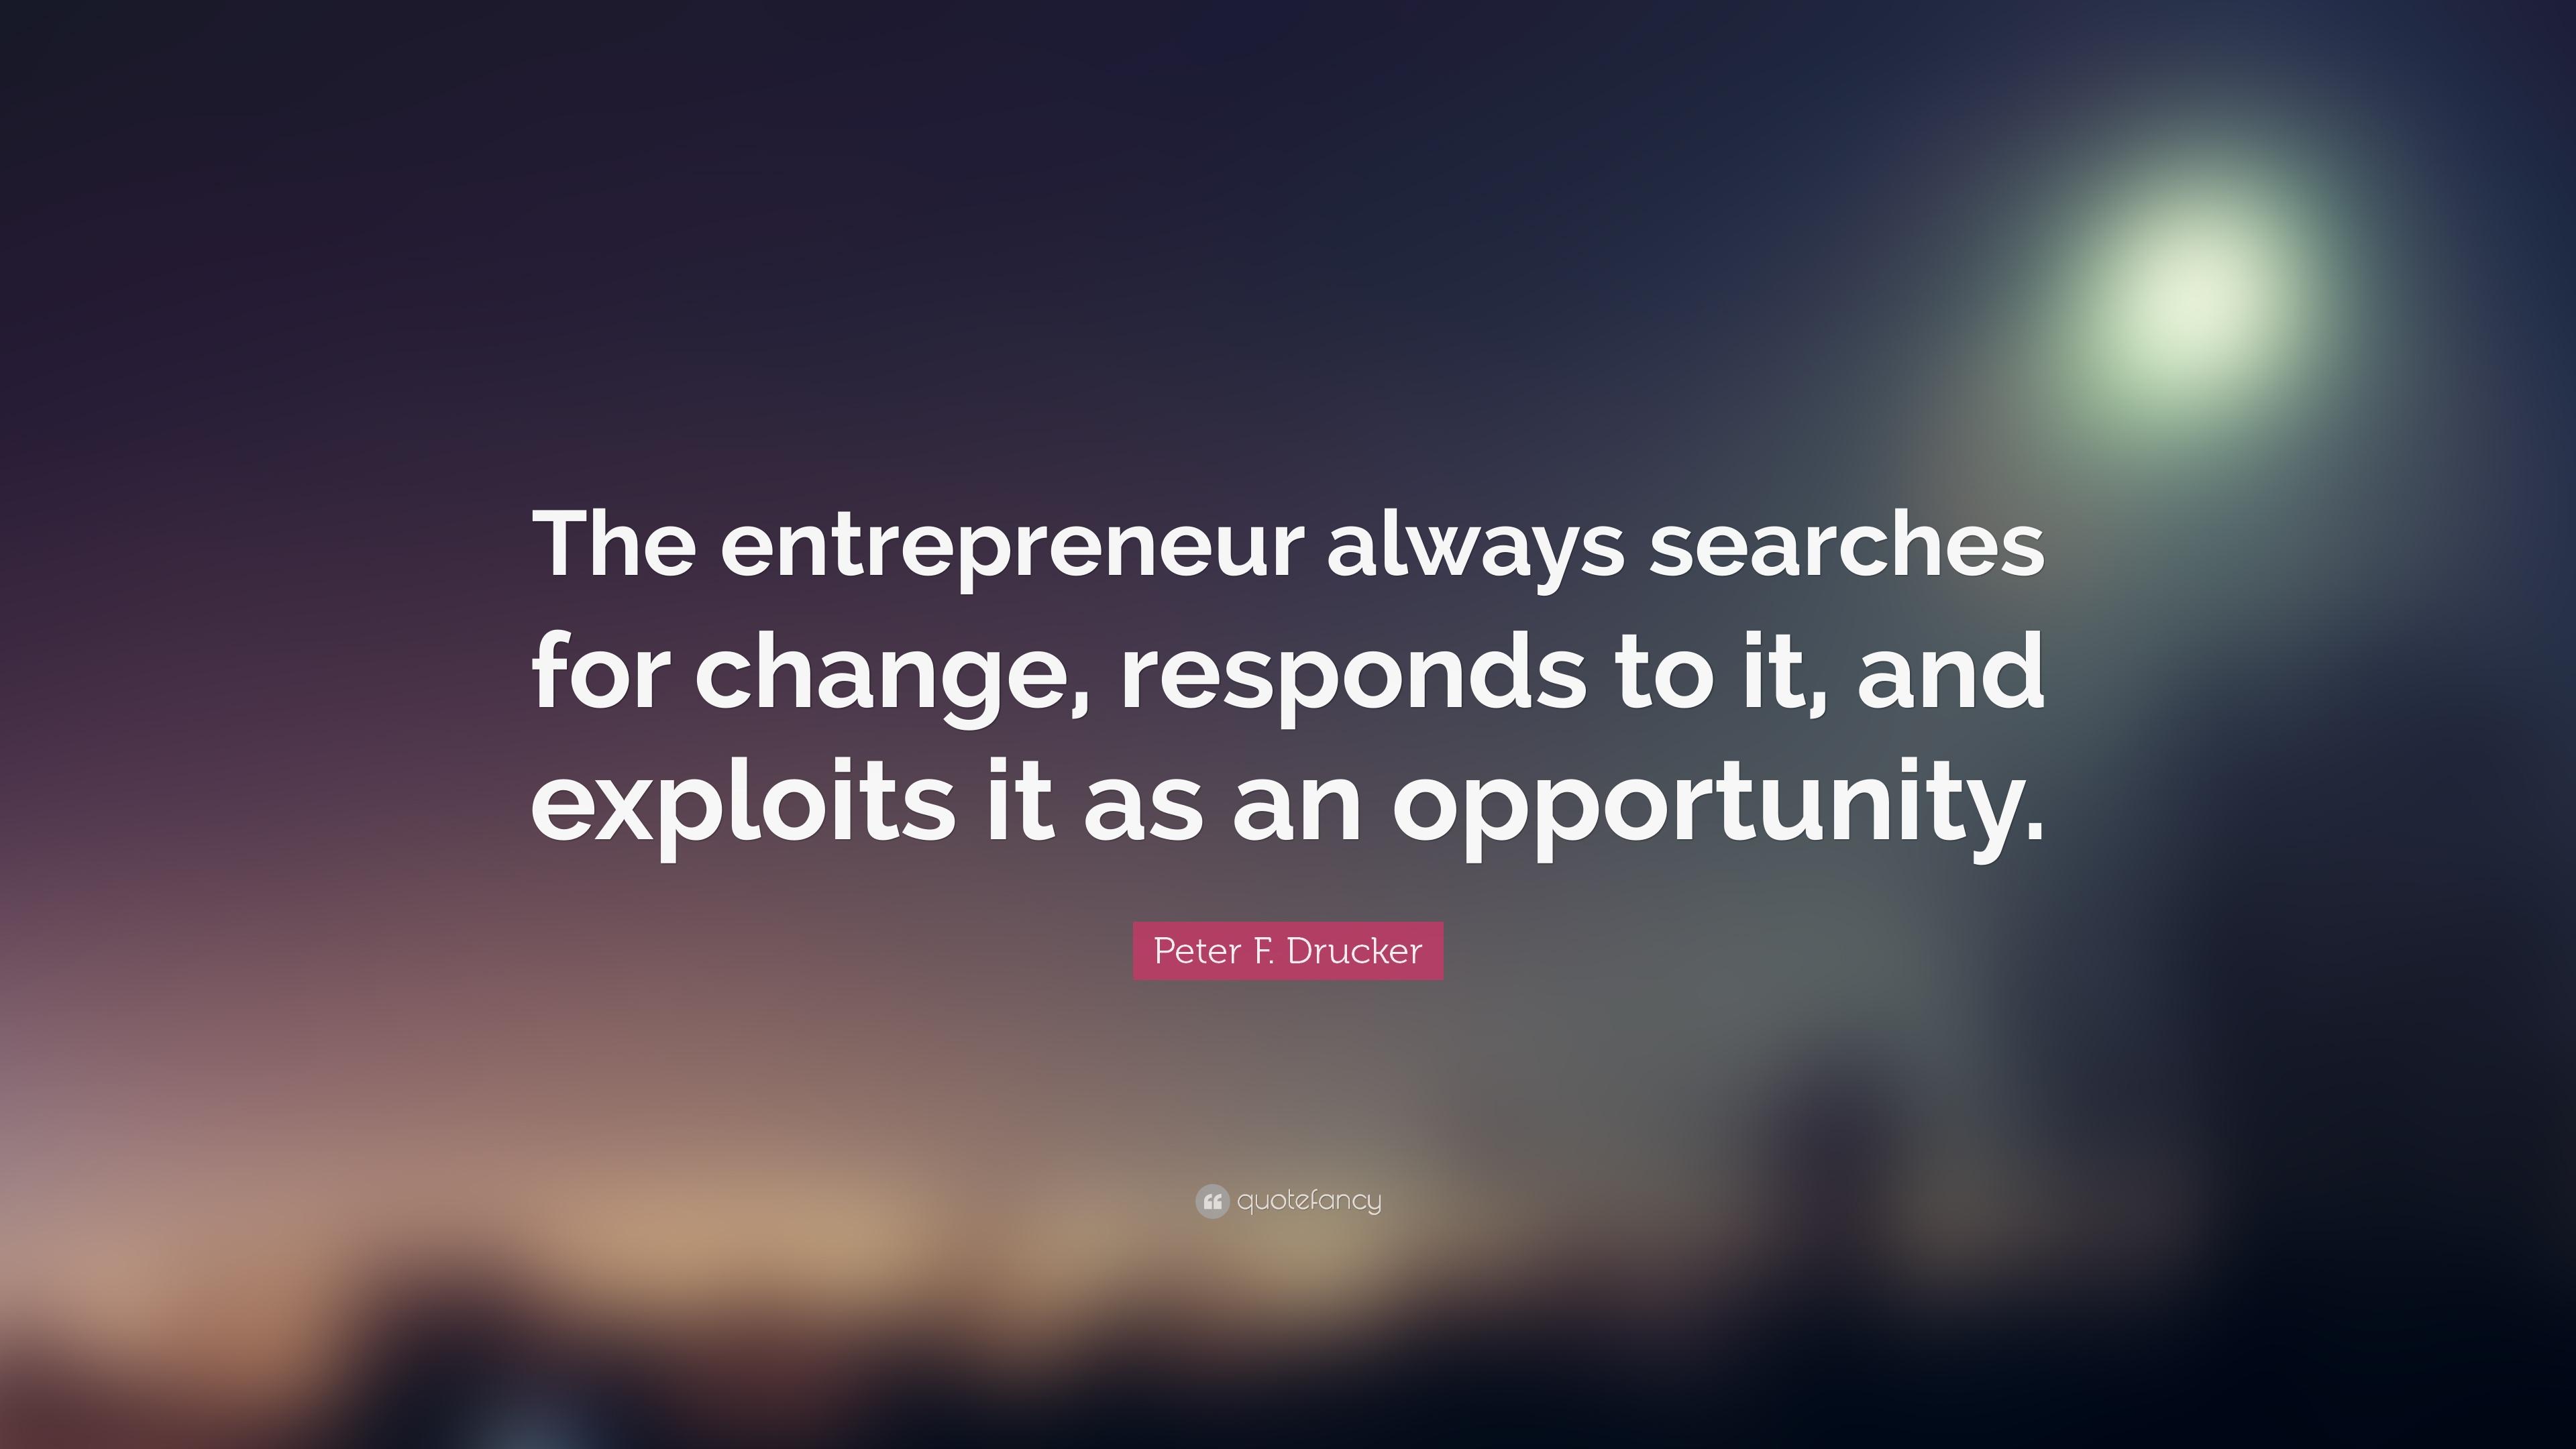 Peter F. Drucker Quote: “The entrepreneur always searches for change, responds to it, and exploits it as an opportunity.” (23 wallpaper)